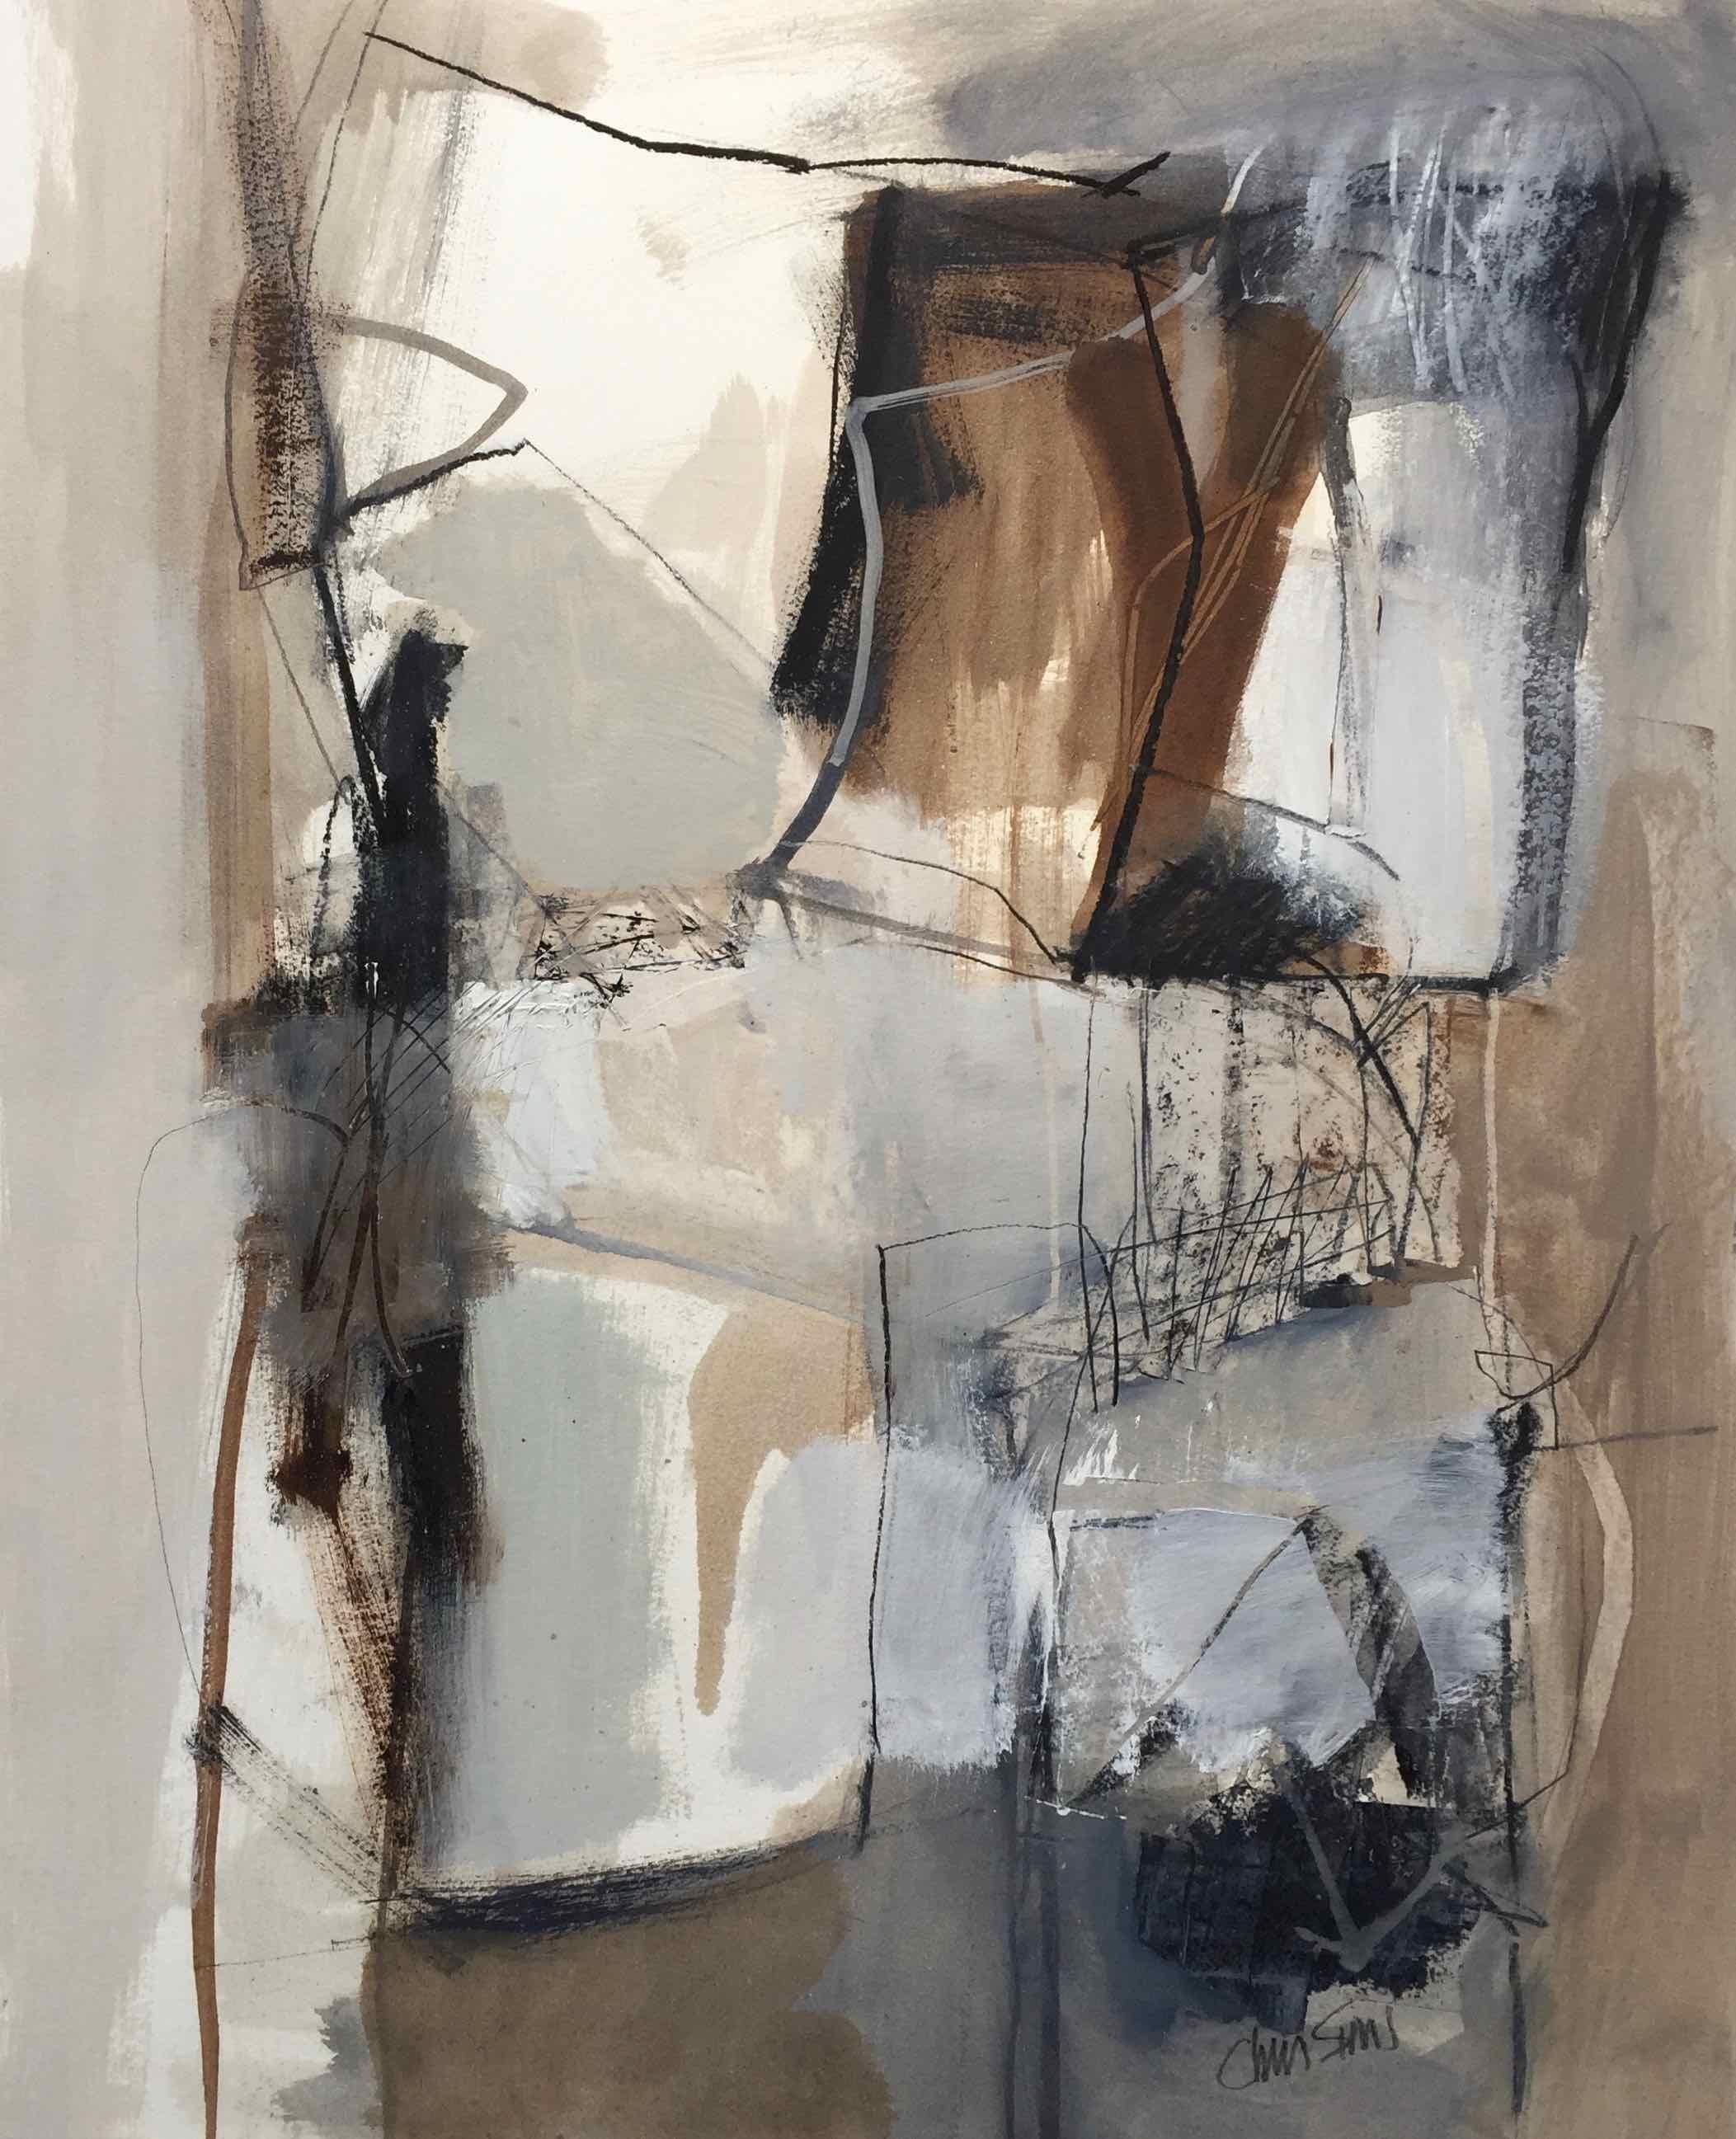 This is one of Chris Sims oil paintings on paper from his portfolio and is sold unframed.  Unlike his paintings on board and canvas, though, these paintings on paper require framing and glazing, but offer a cost effective alternative to owning one